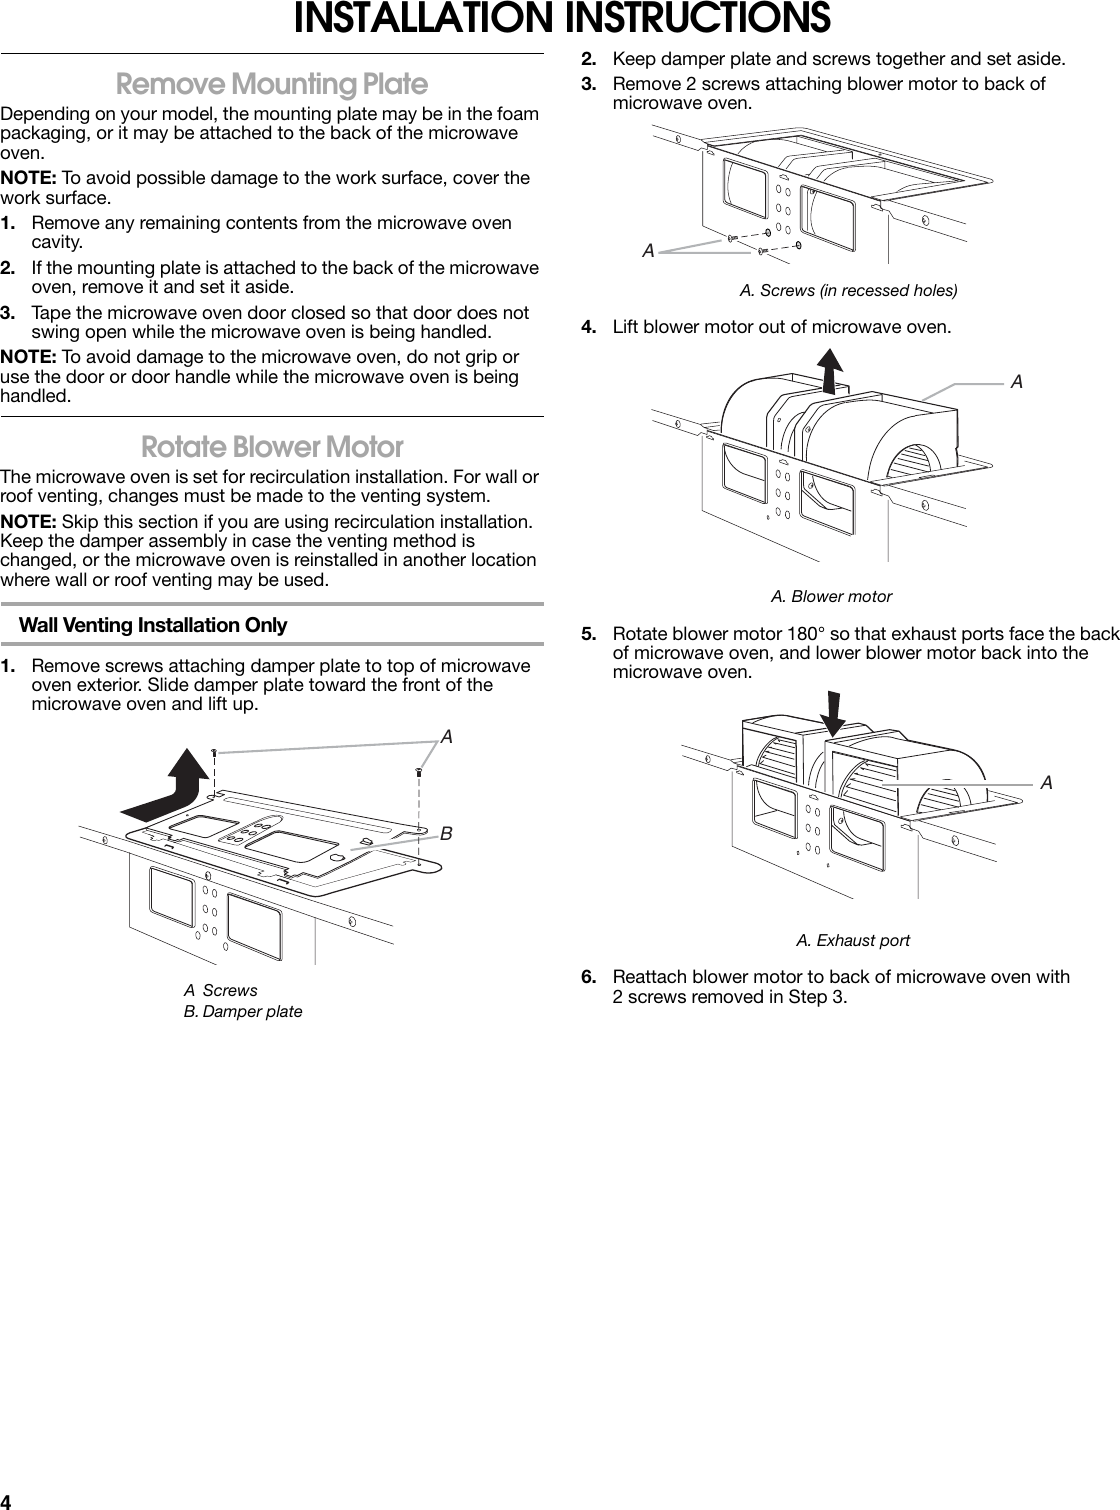 Page 4 of 12 - Whirlpool Whirlpool-W10238252A-Users-Manual- W10238252A  Whirlpool-w10238252a-users-manual